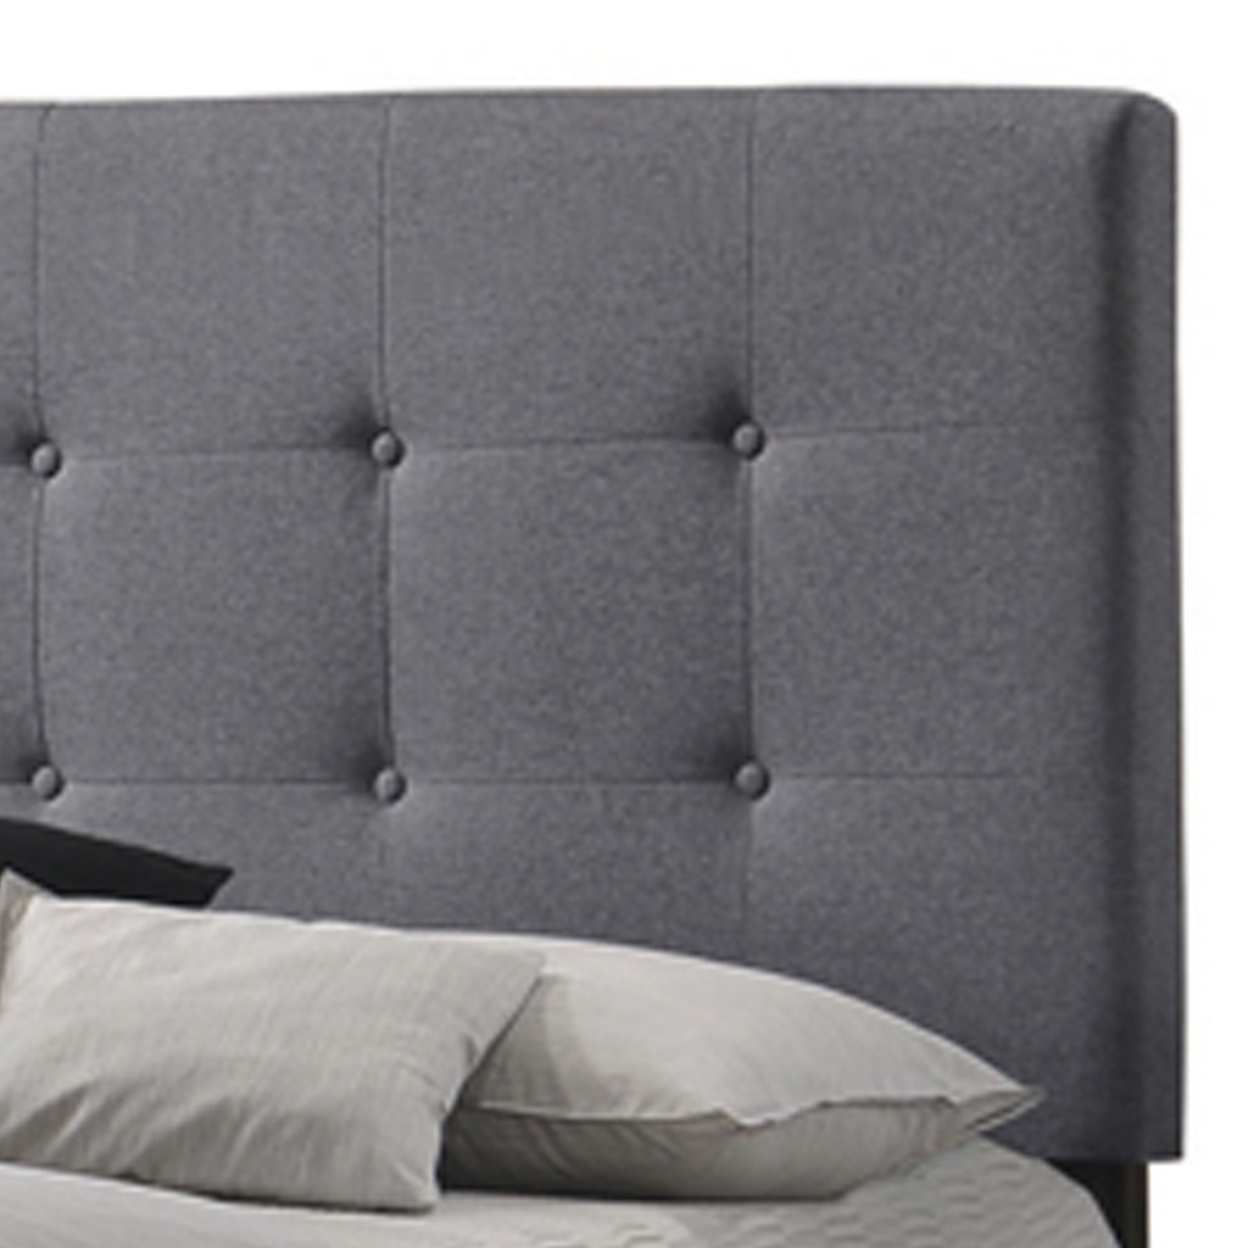 Full Size Bed With Square Button Tufted Headboard And Chamfered Legs, Gray- Saltoro Sherpi